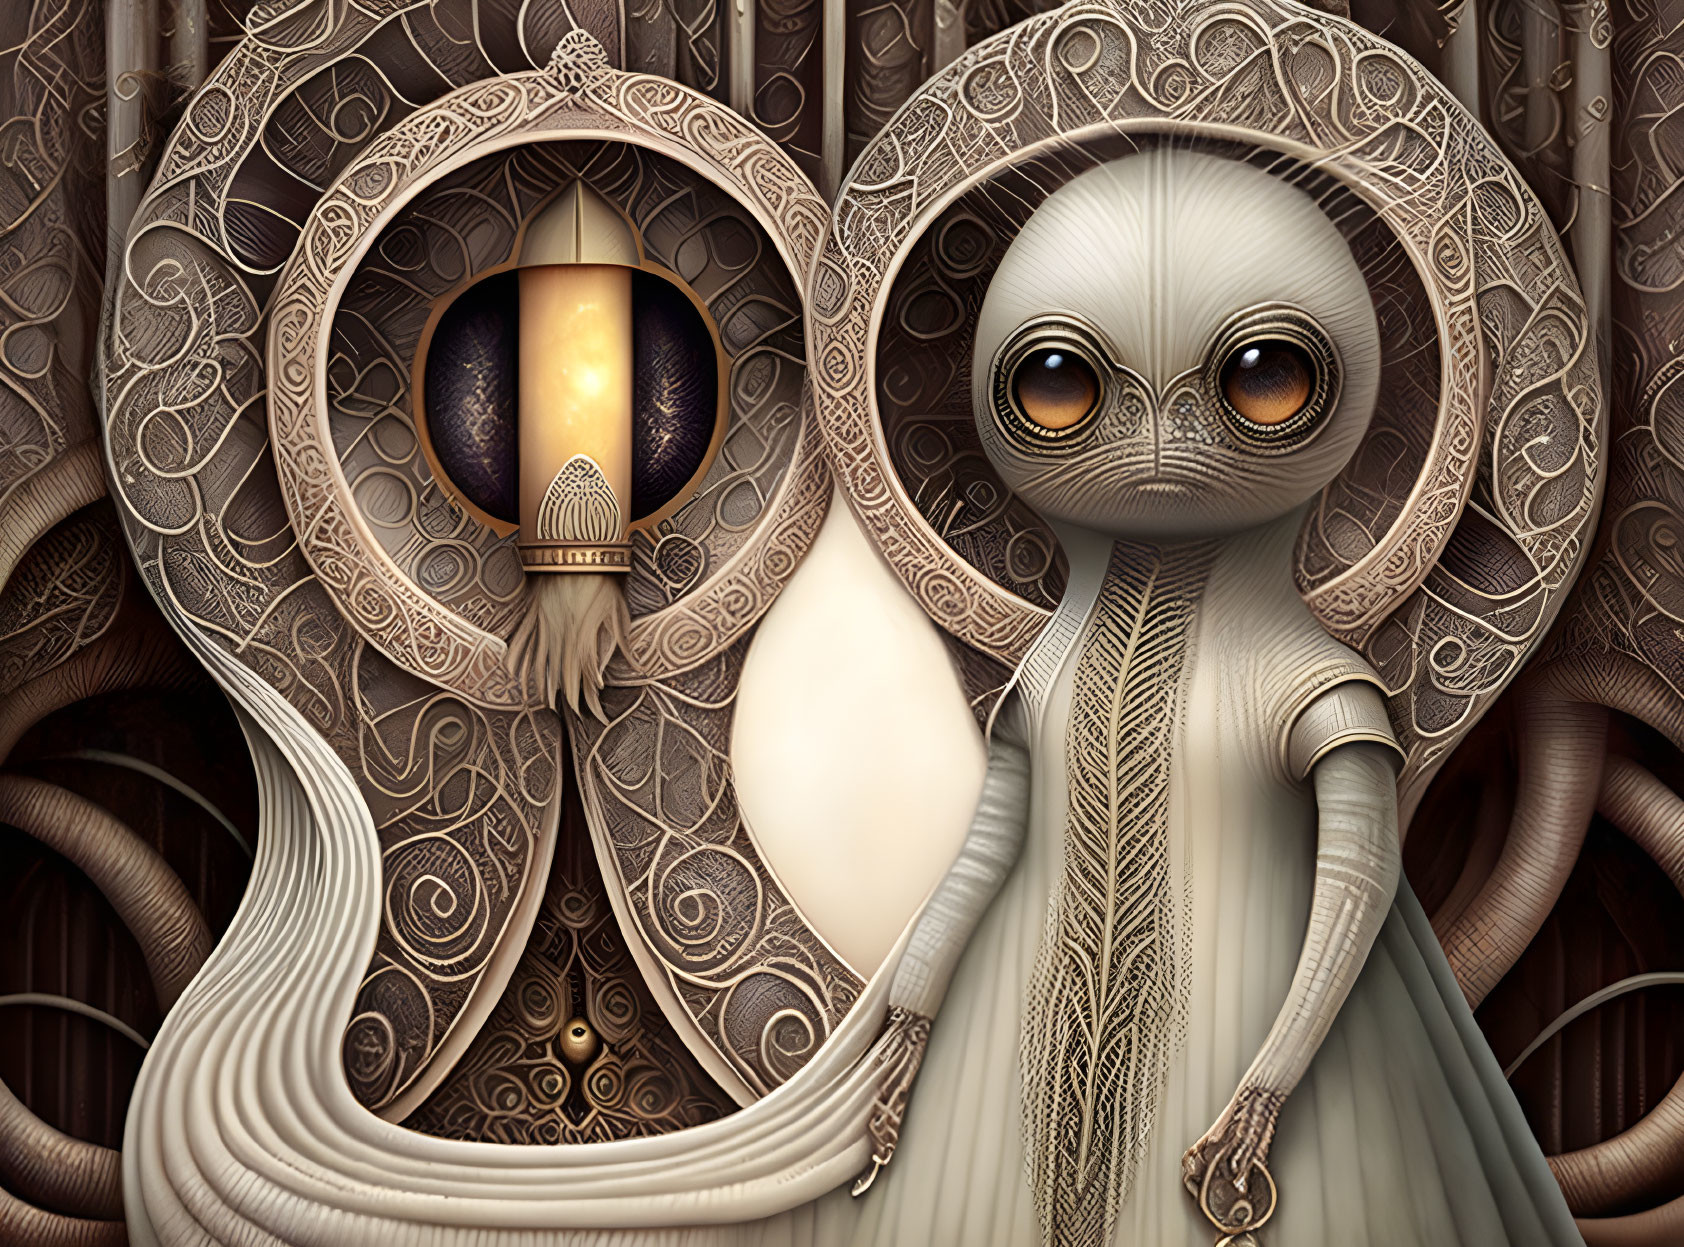 Alien creature in ornate robe with large eyes in intricate room